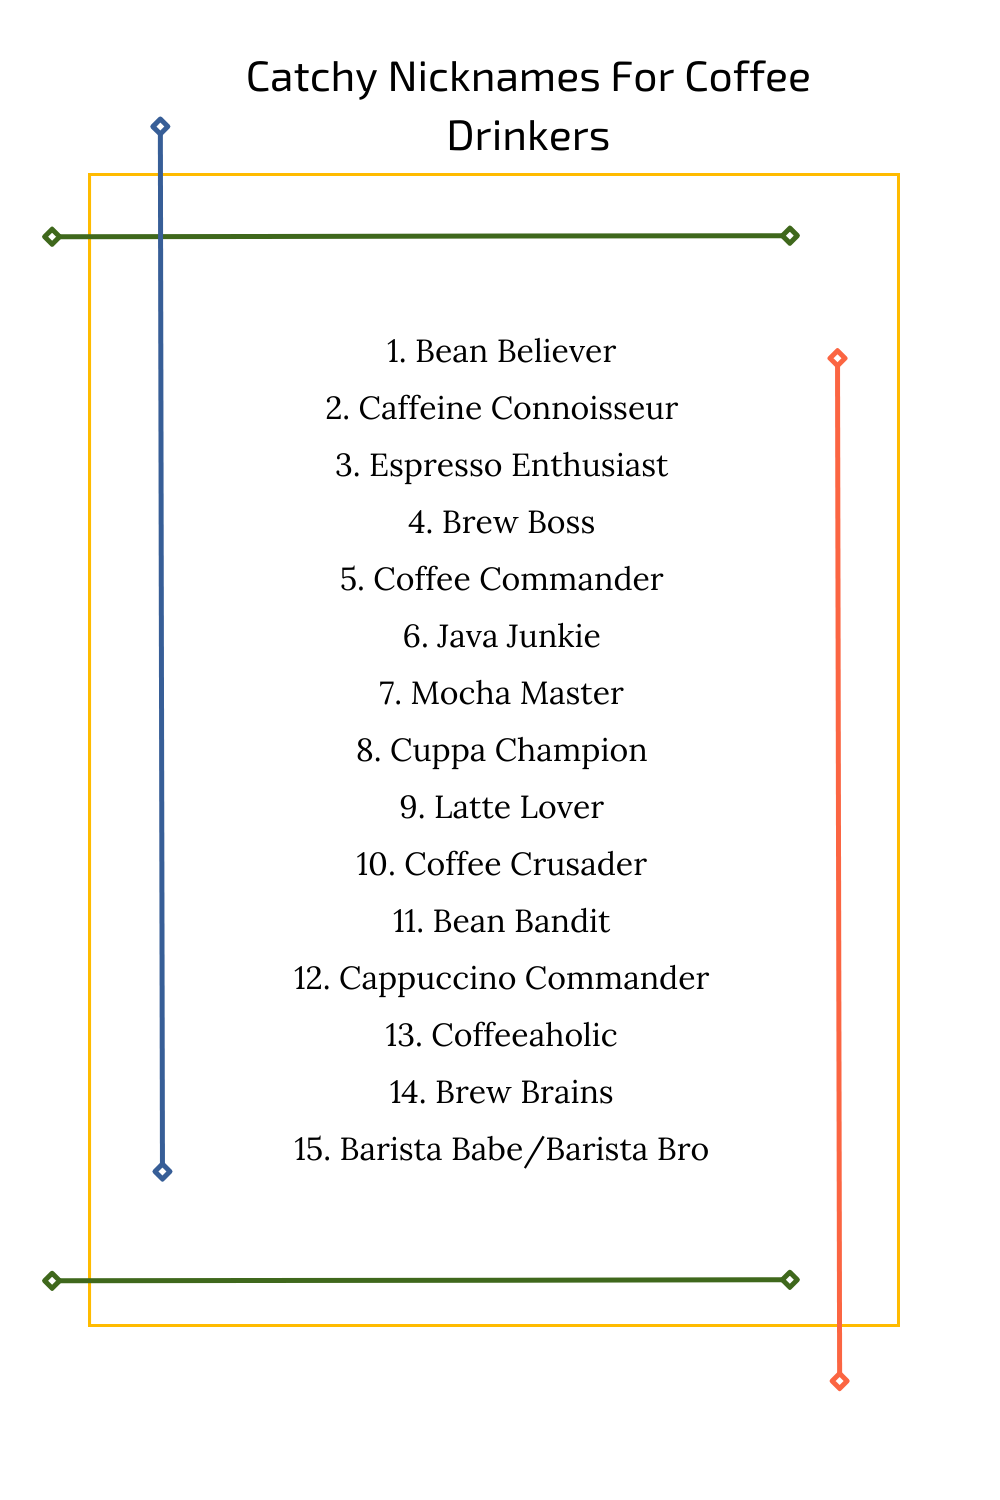 Catchy Nicknames For Coffee Drinkers